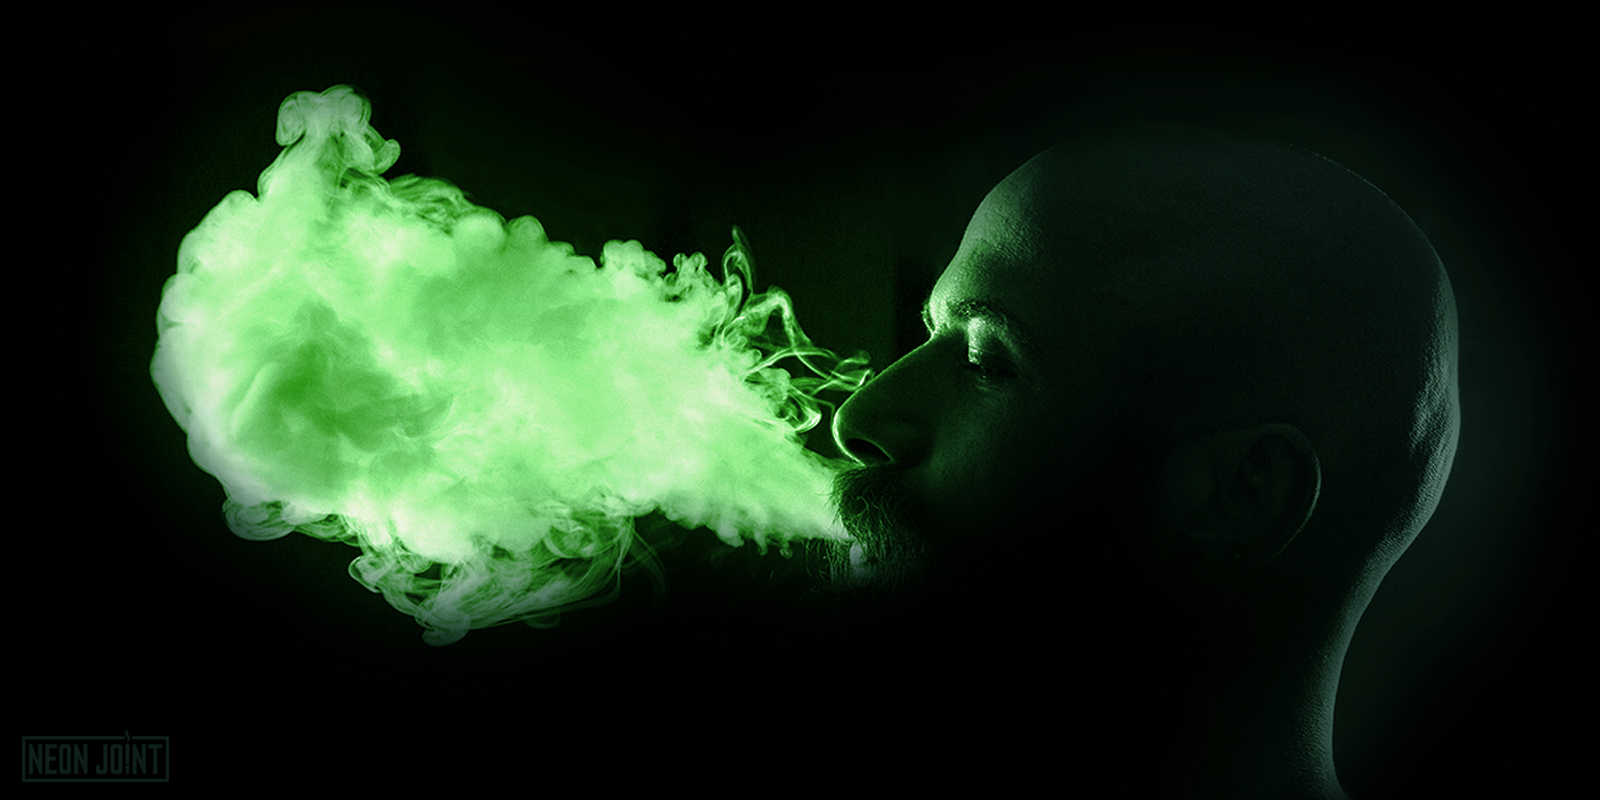 Vaping 101 Guide: Everything You Need to Know